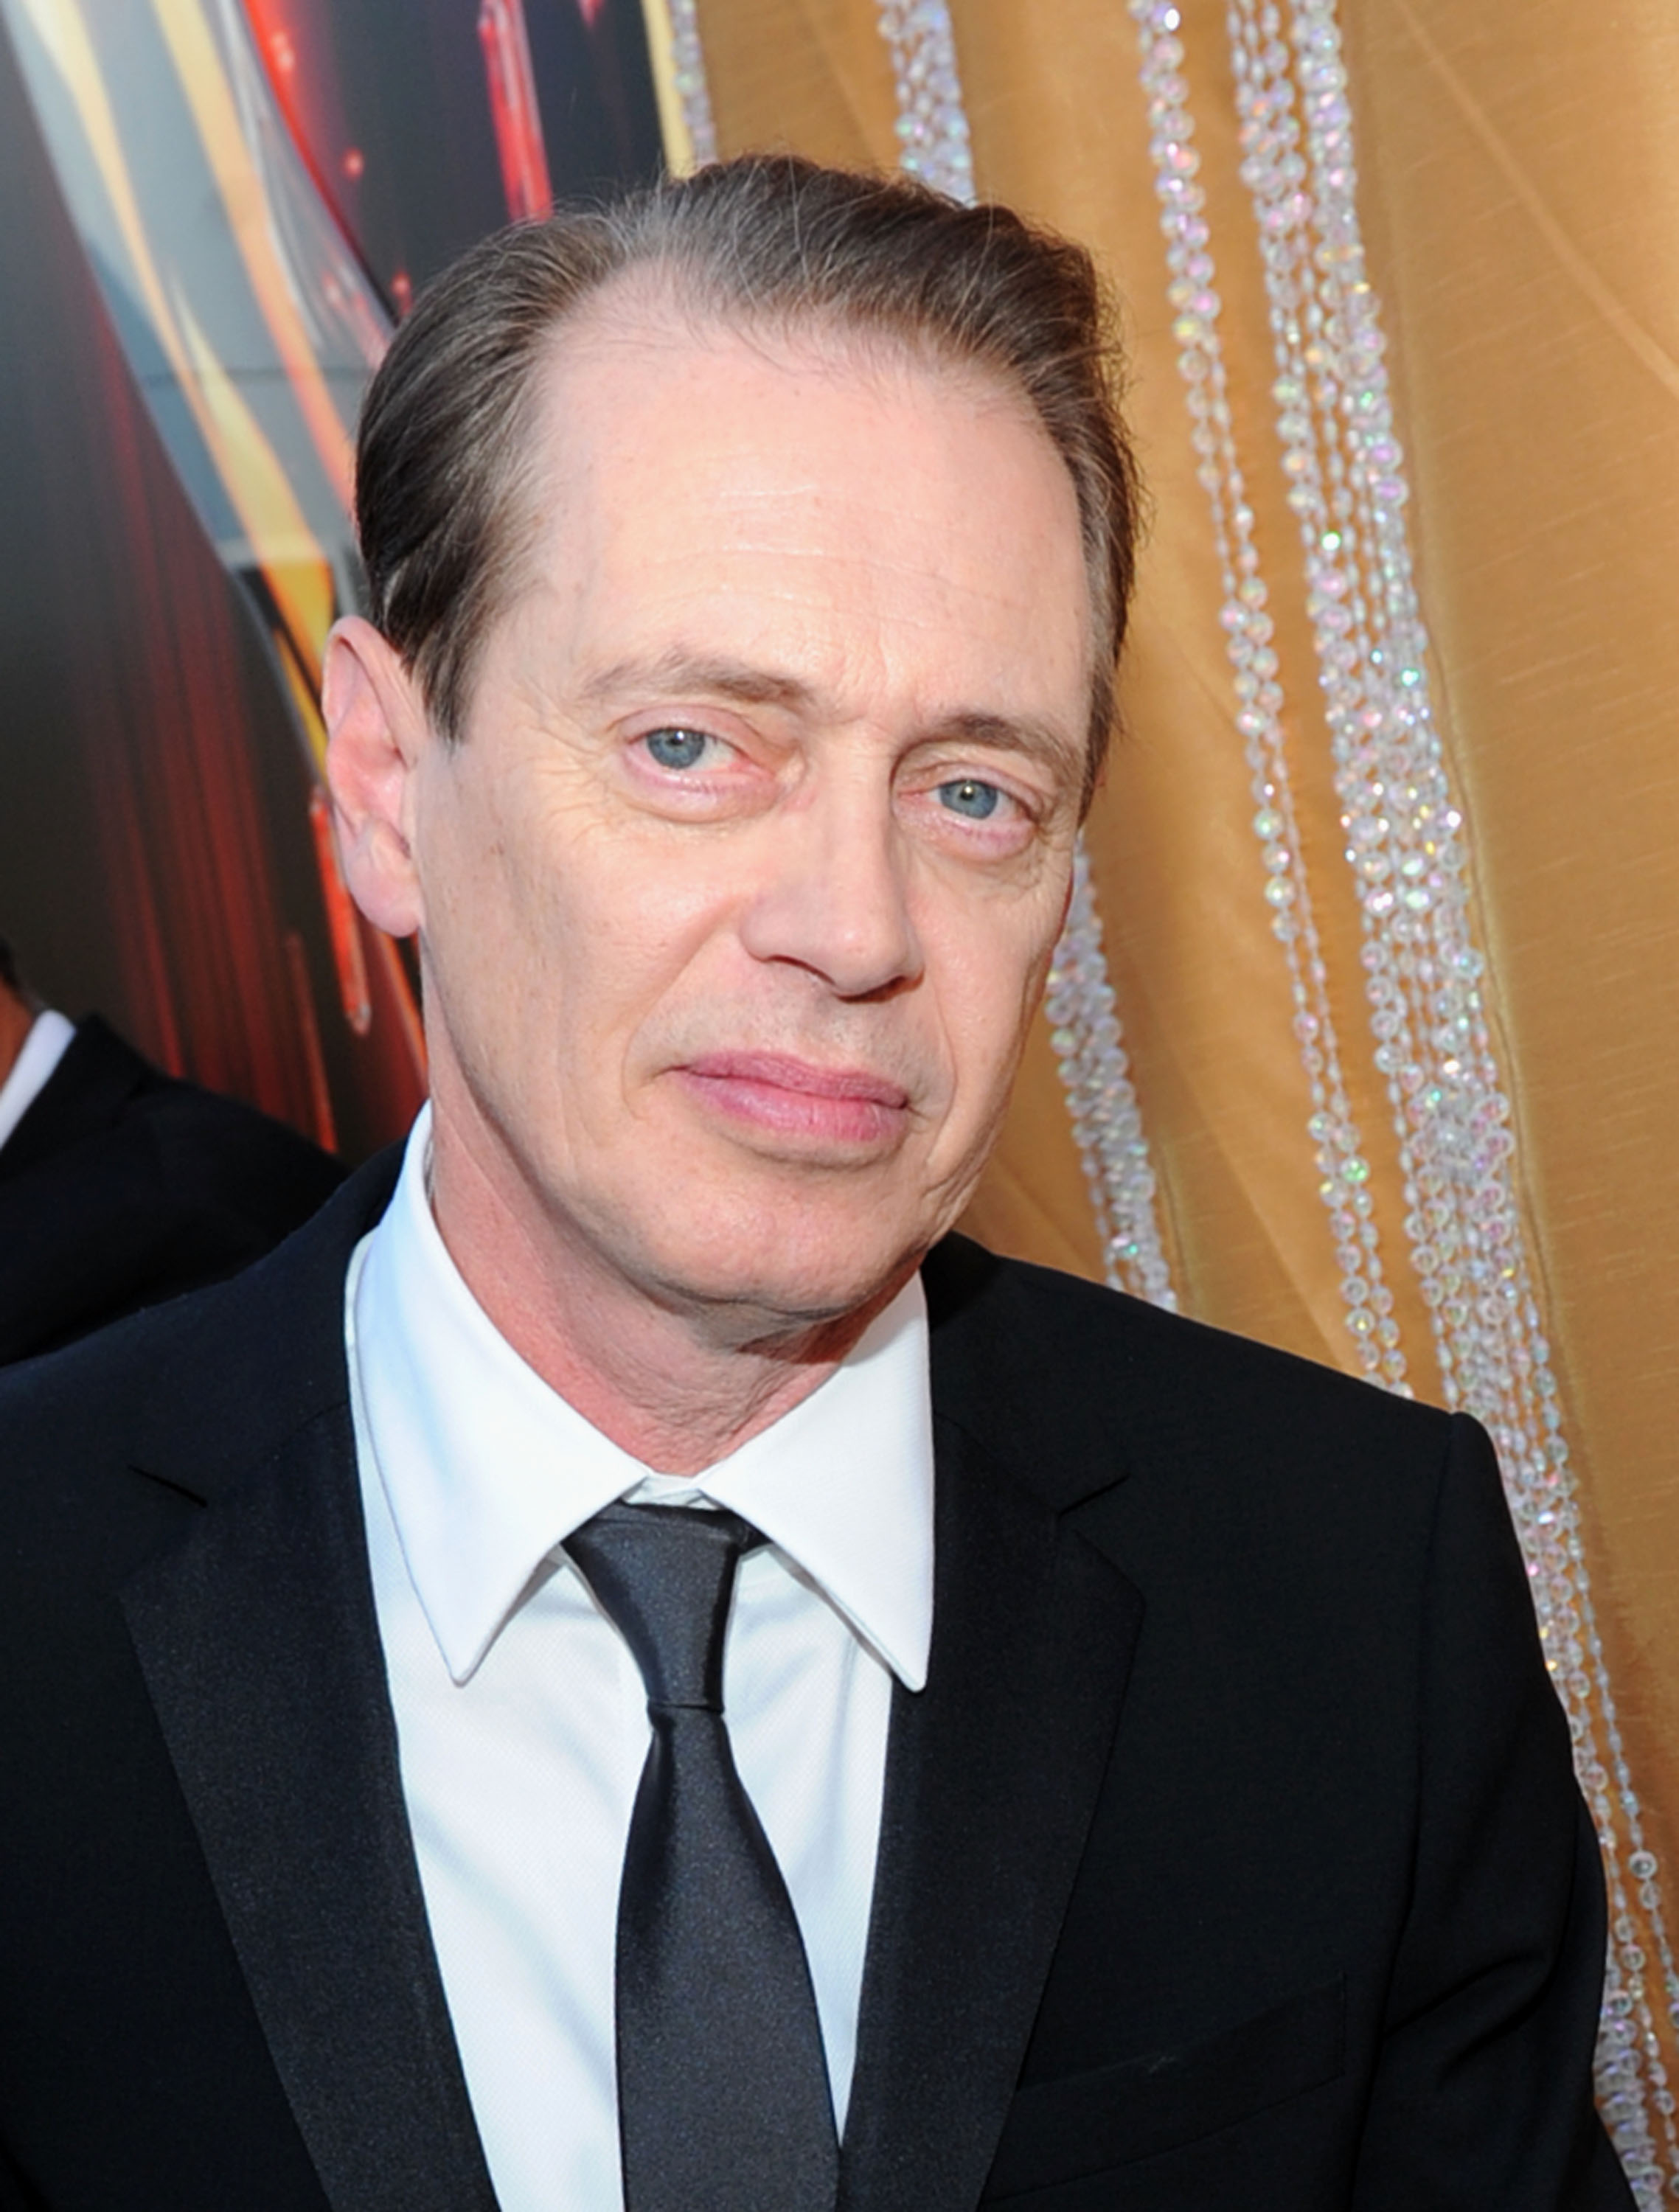 Steve Buscemi attends the 63rd Annual Primetime Emmy Awards in Los Angeles, California on September 18, 2011 | Source: Getty Images